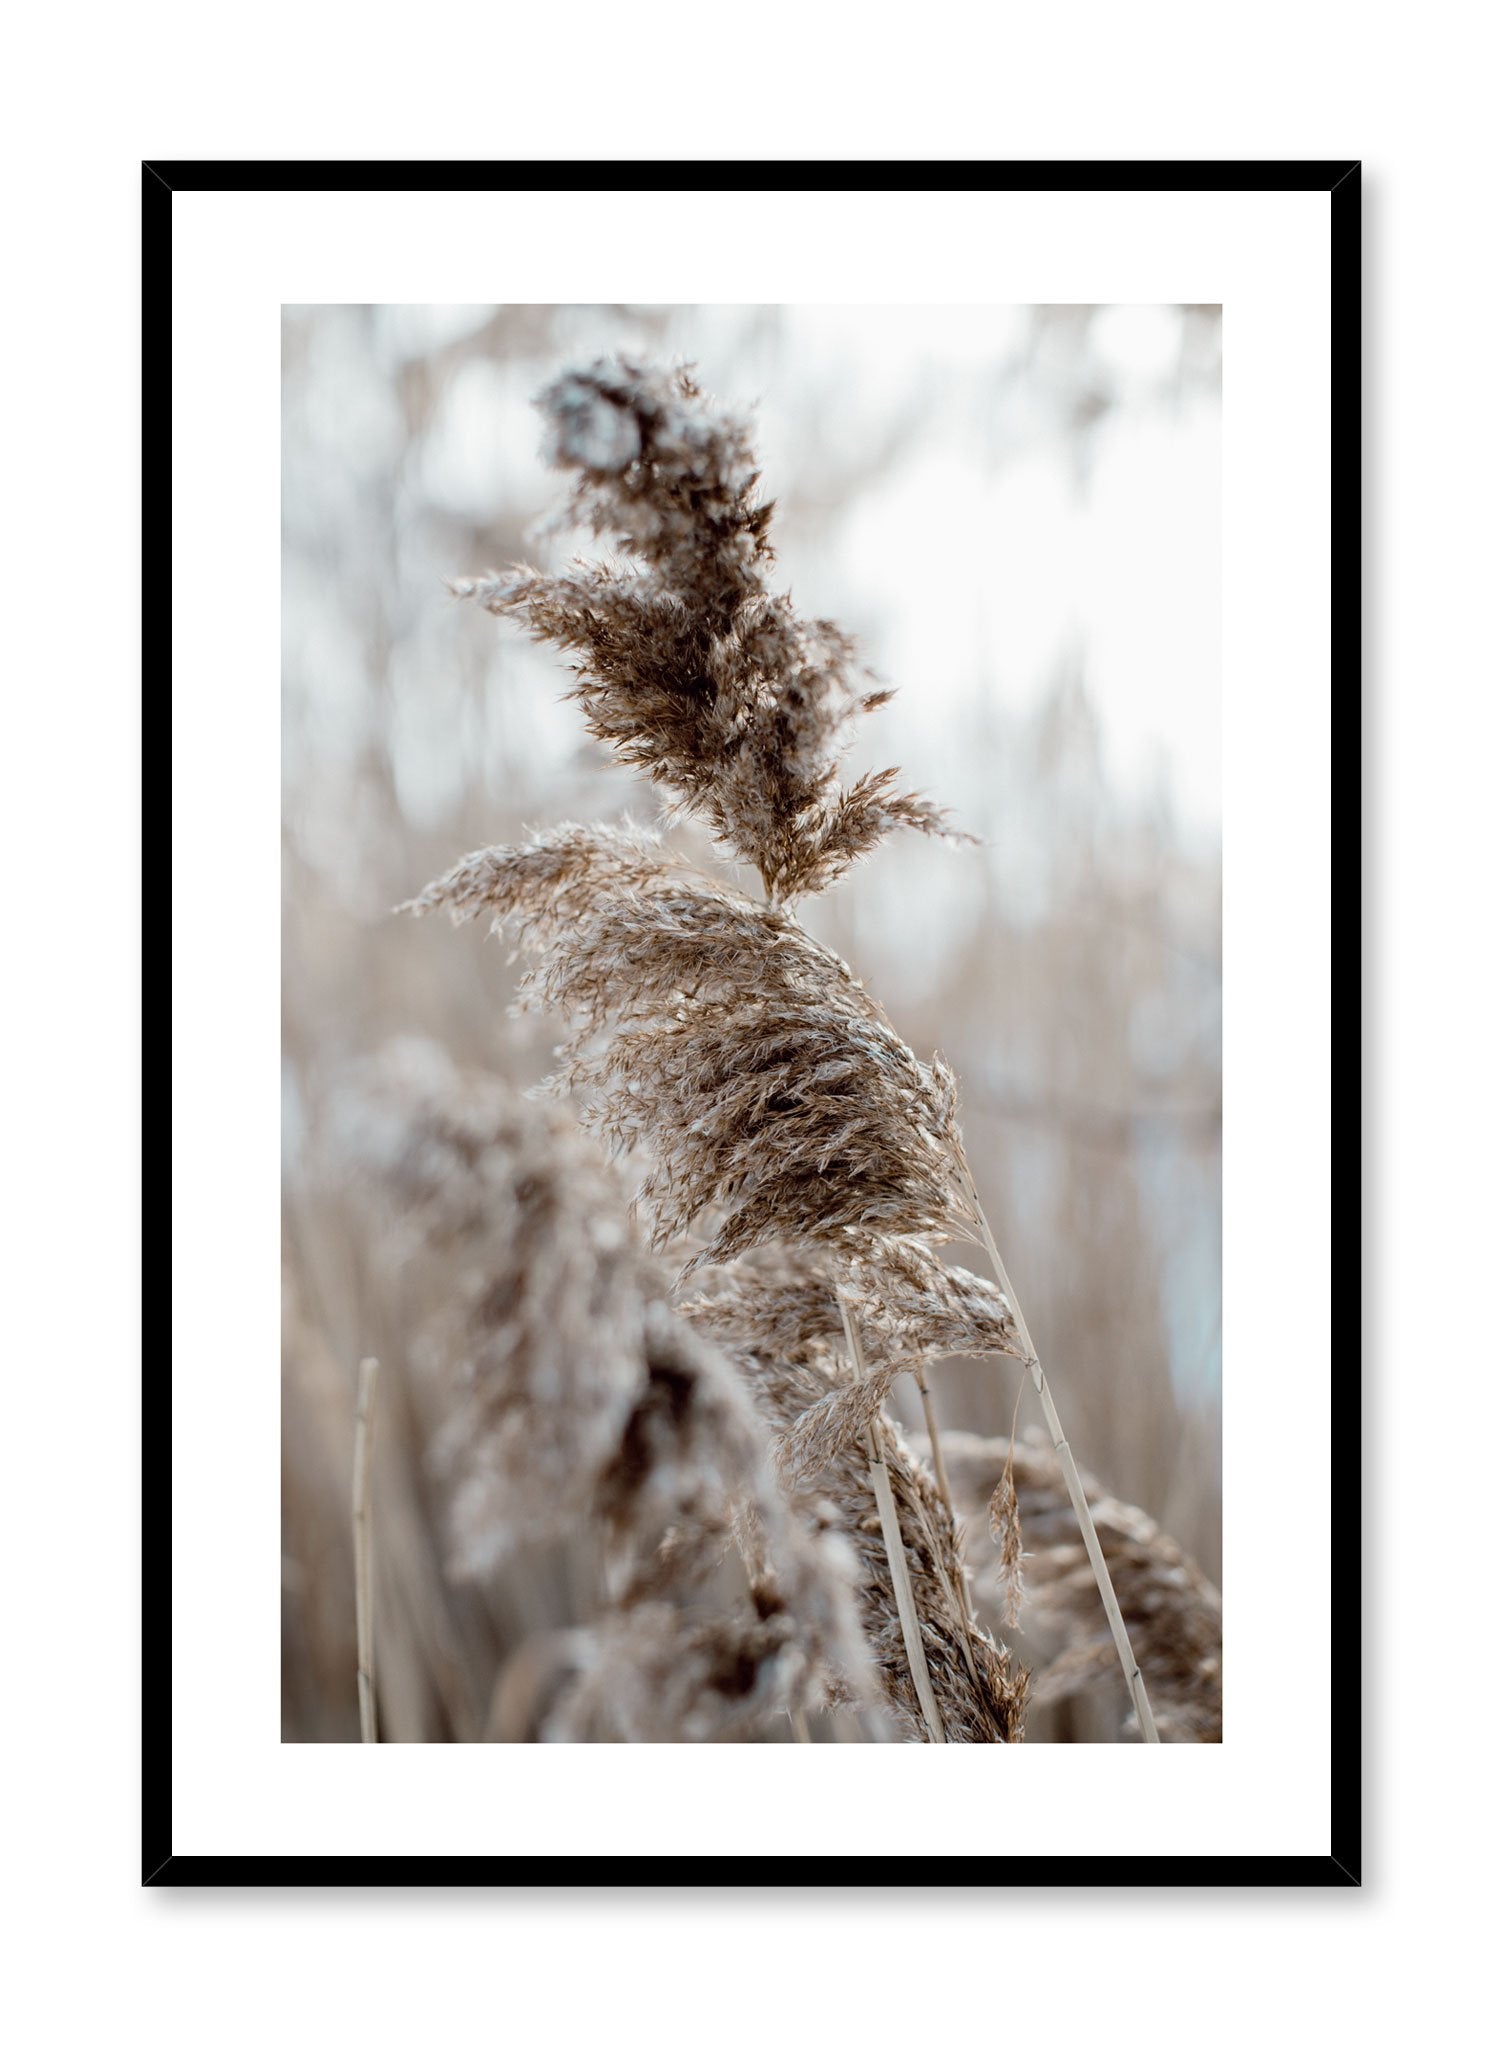 "Wintry Plumes" is a botanical photography poster by Opposite Wall of fluffy pampas grasses in a cold climate setting.